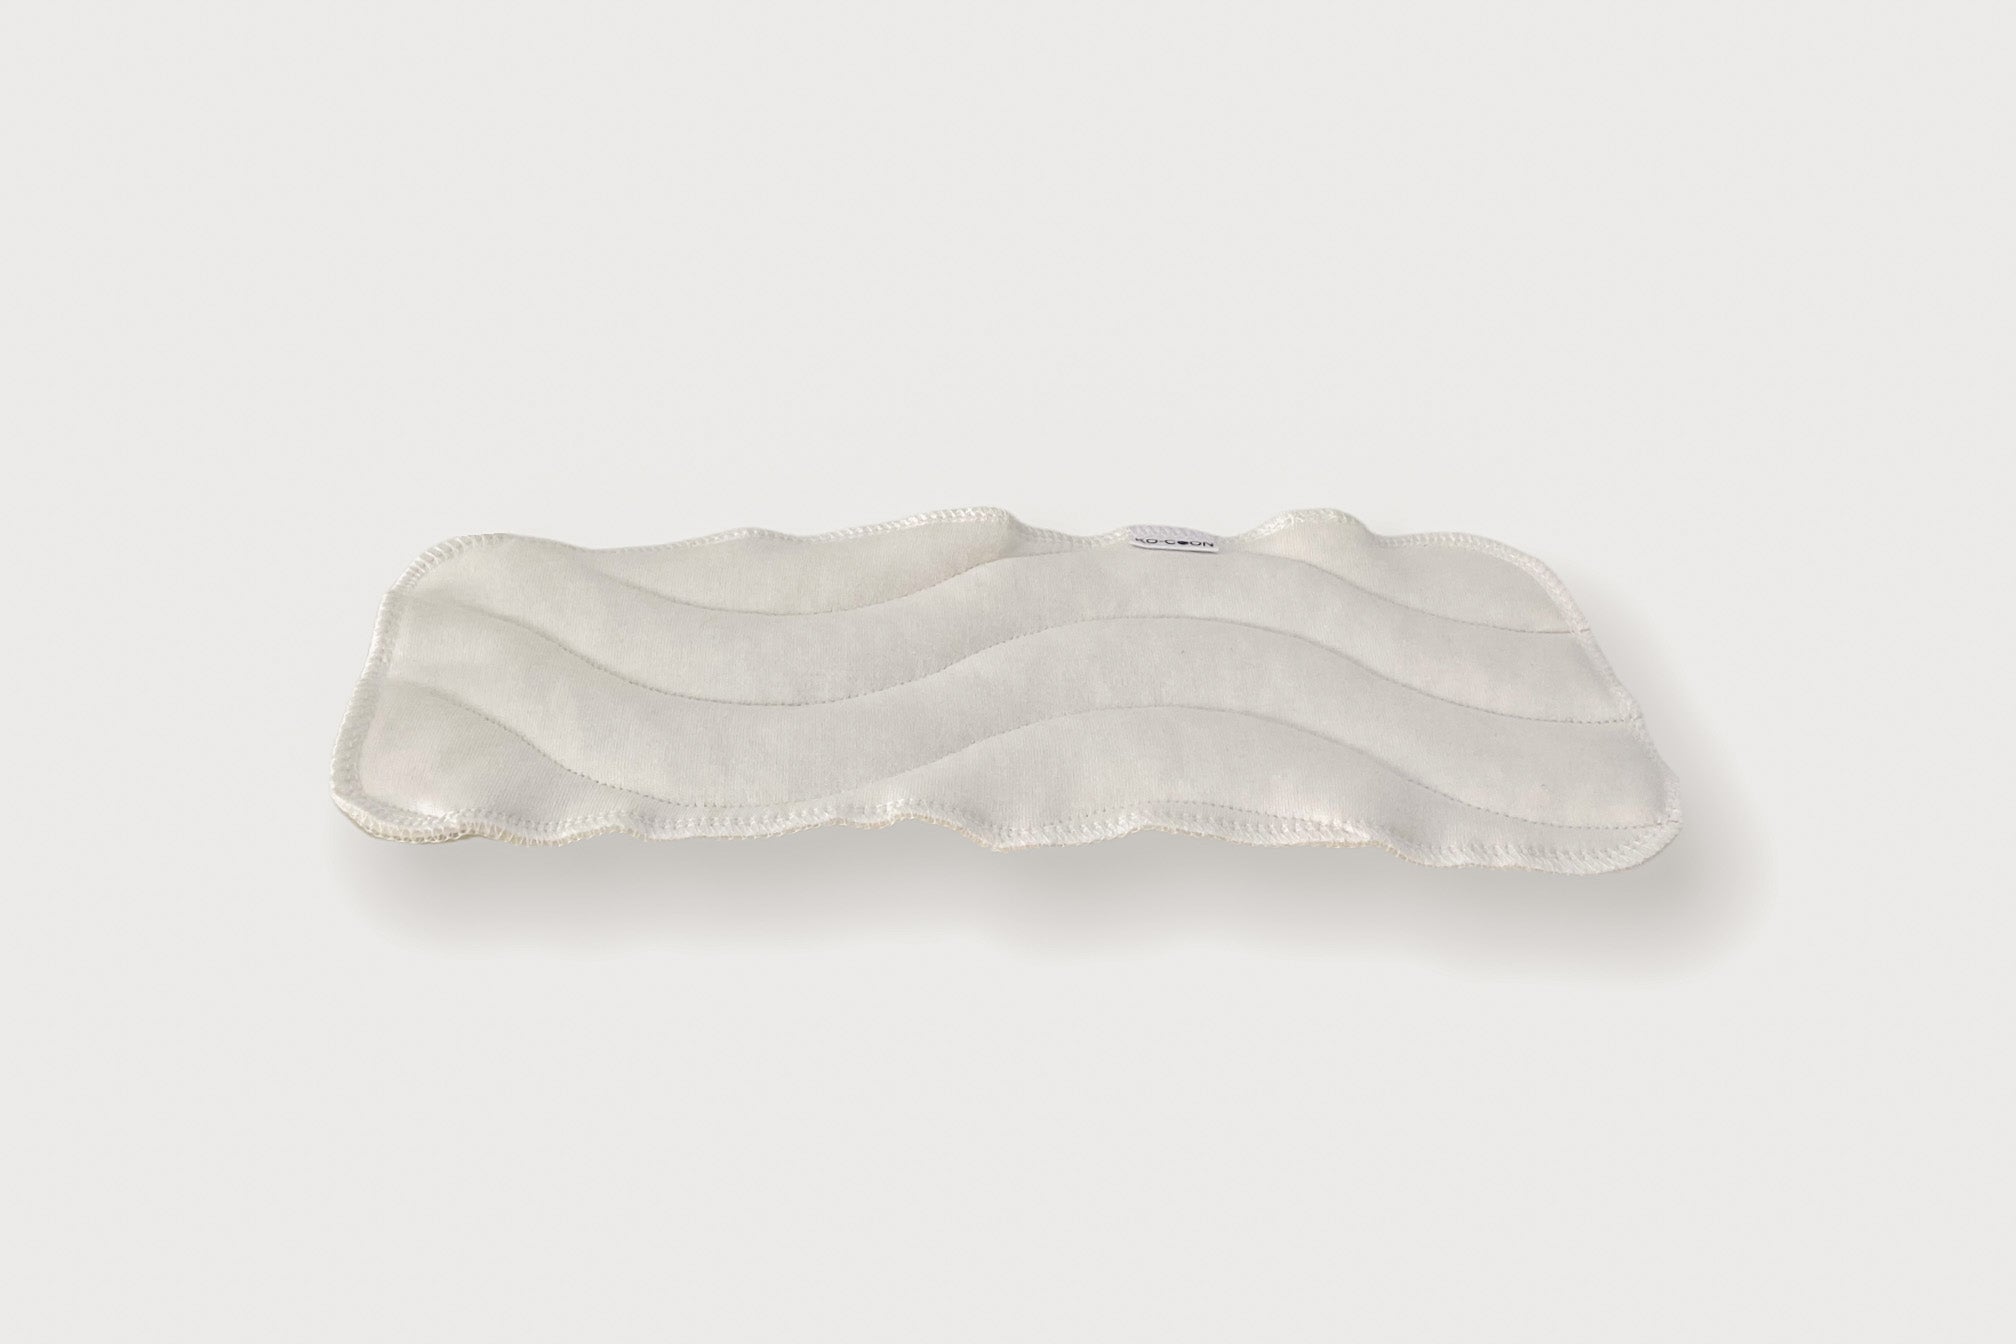 Nappy liner - Soft Quilted Merino wool & cotton knit